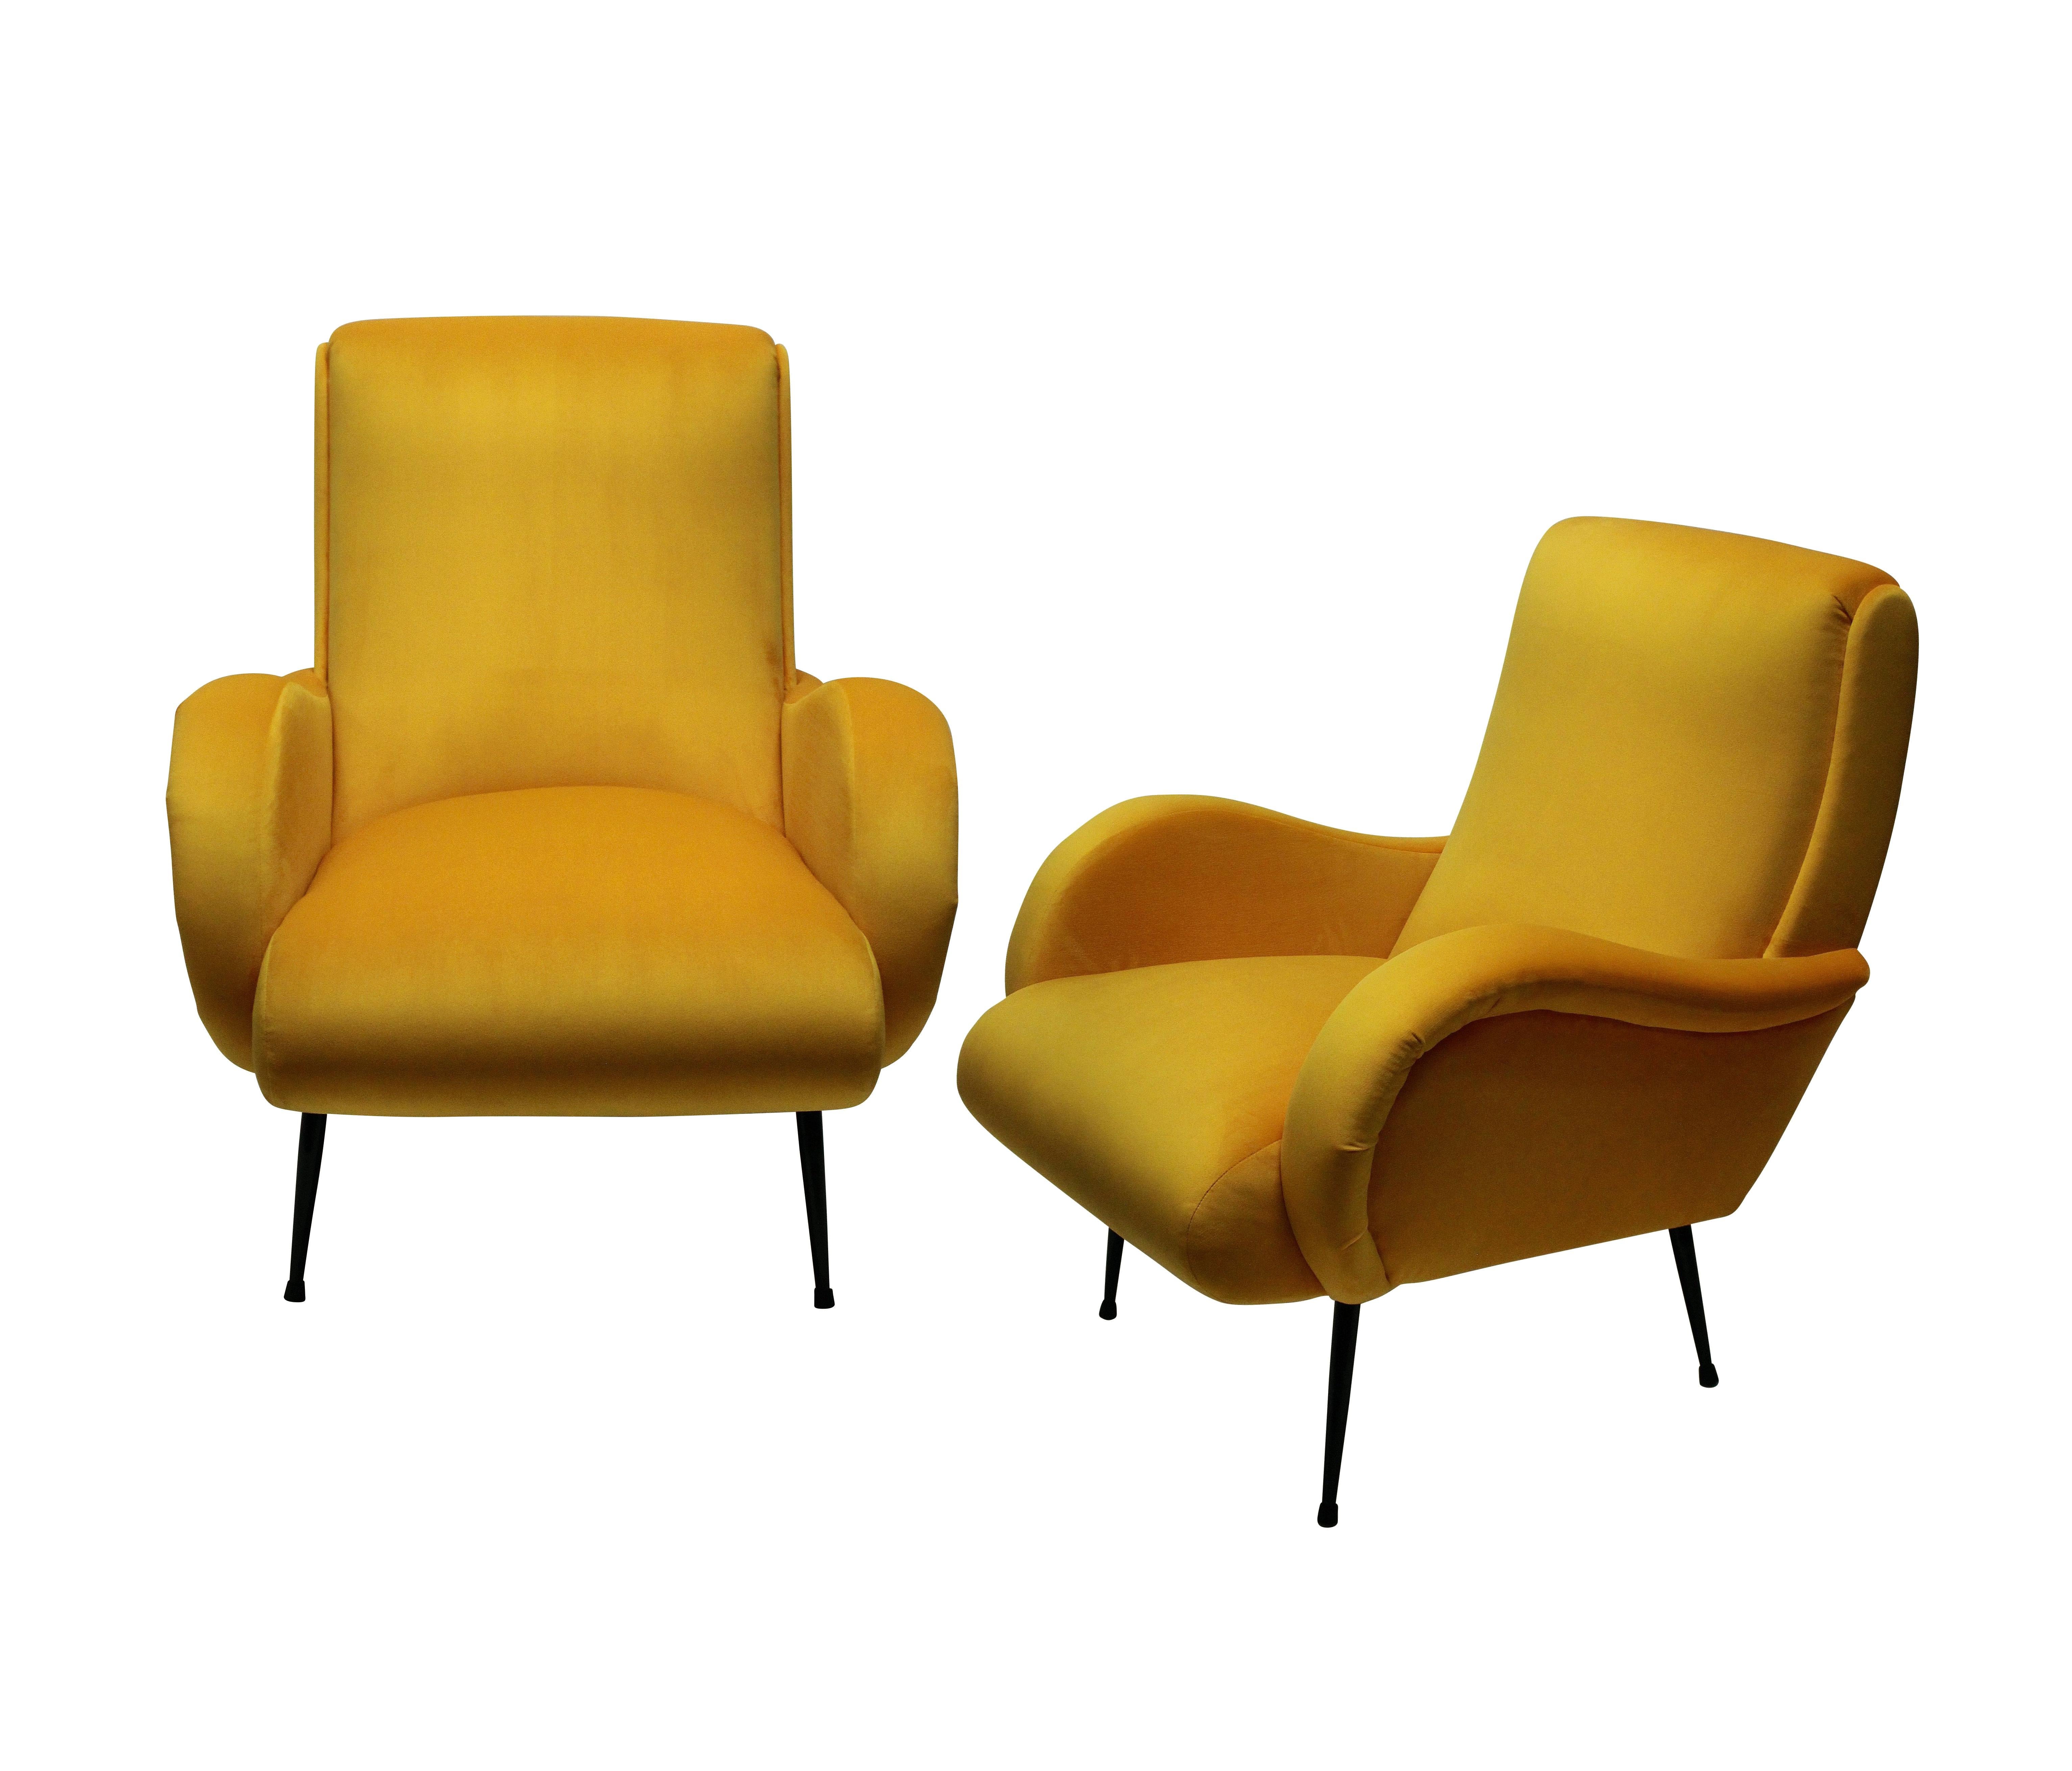 A pair of stylish and comfortable Italian midcentury armchairs, newly upholstered in warm yellow velvet.